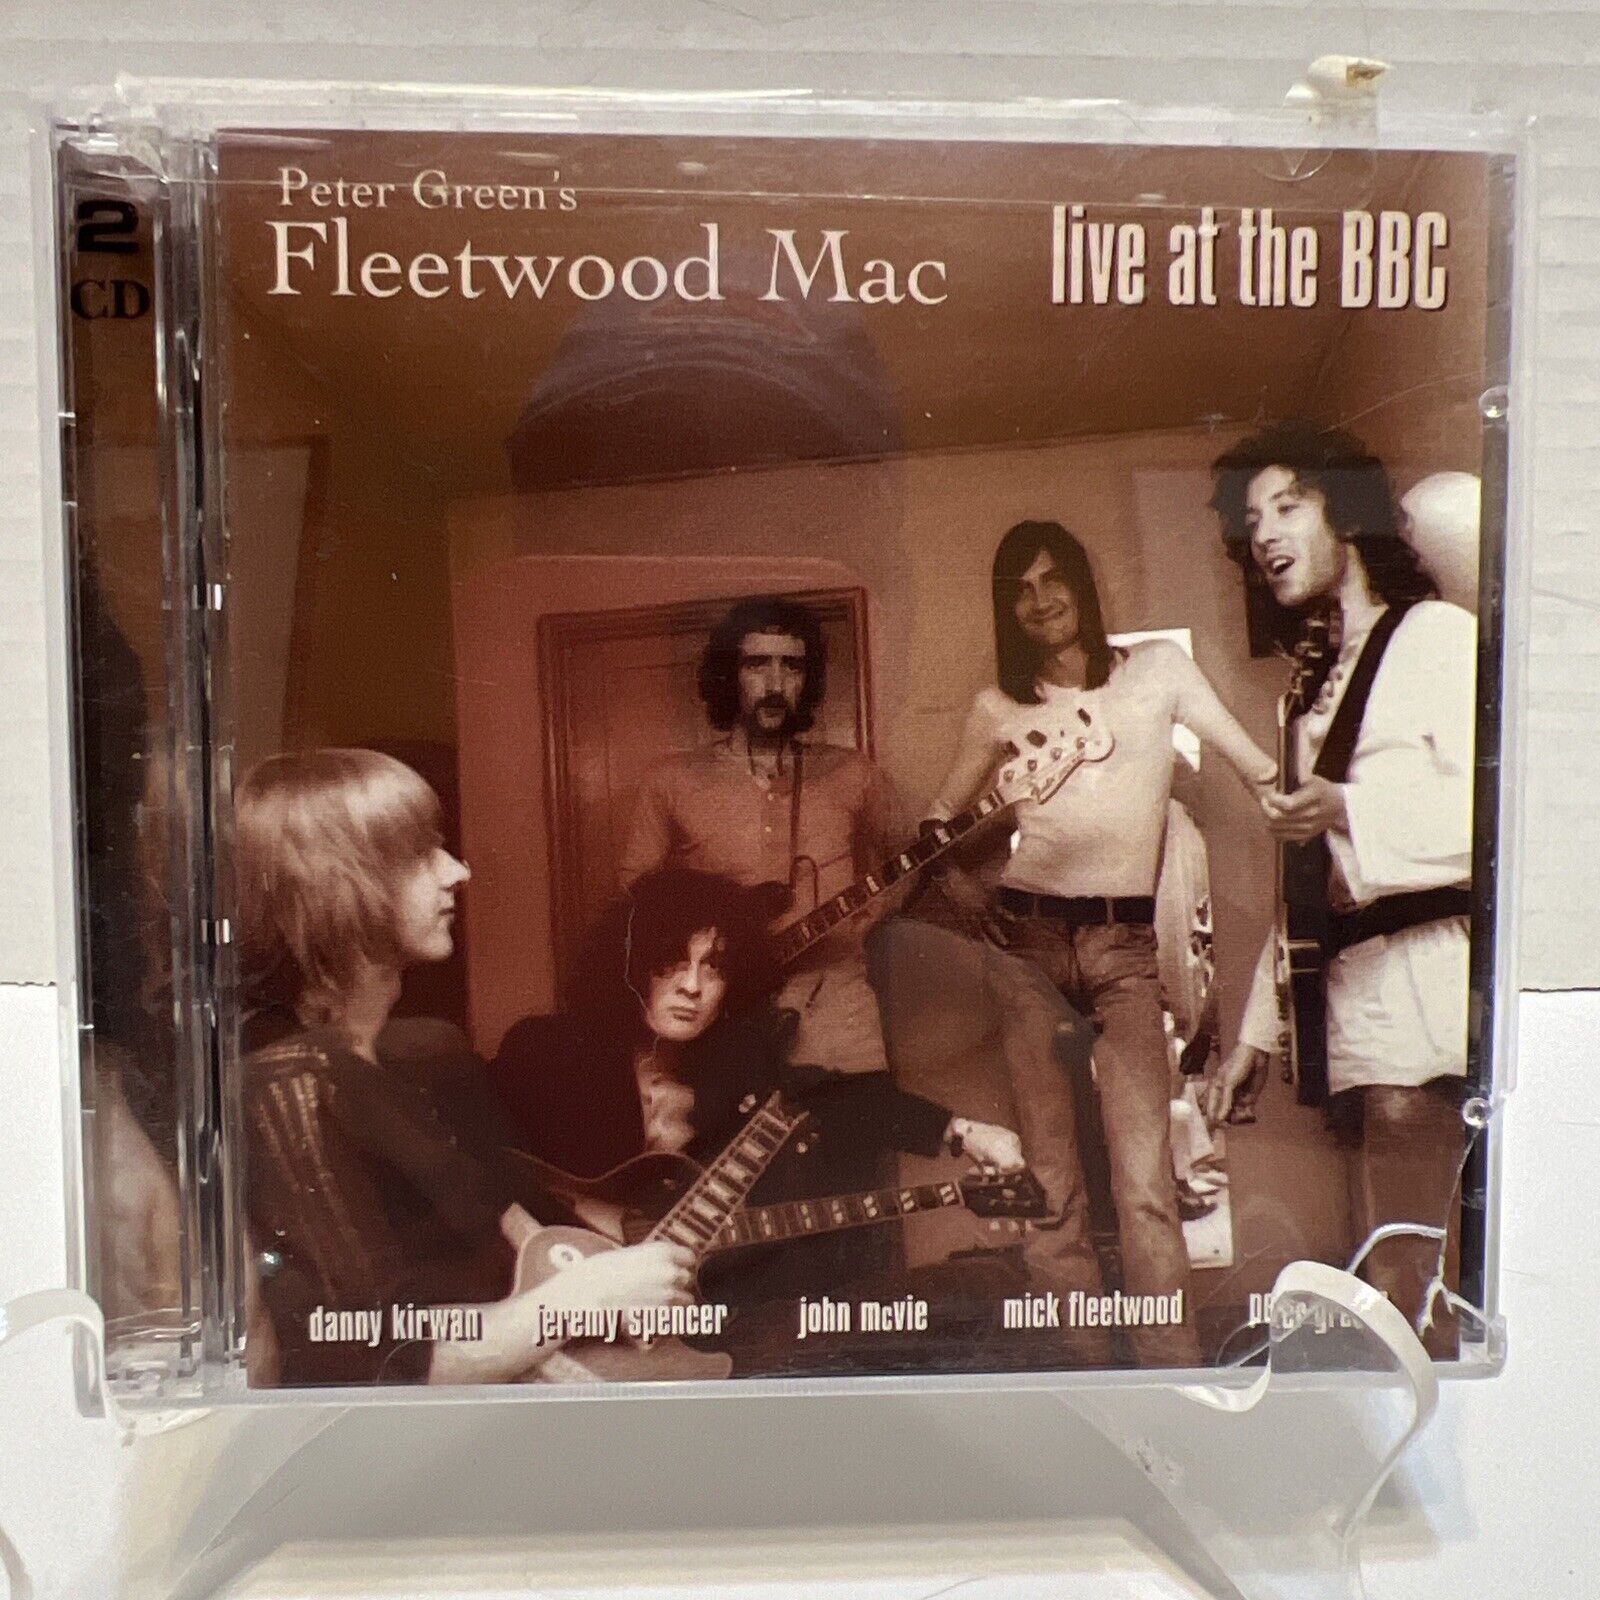 Live at the BBC by Fleetwood Mac/Peter Green (CD, Aug-2001, 2 Discs) RARE OOP